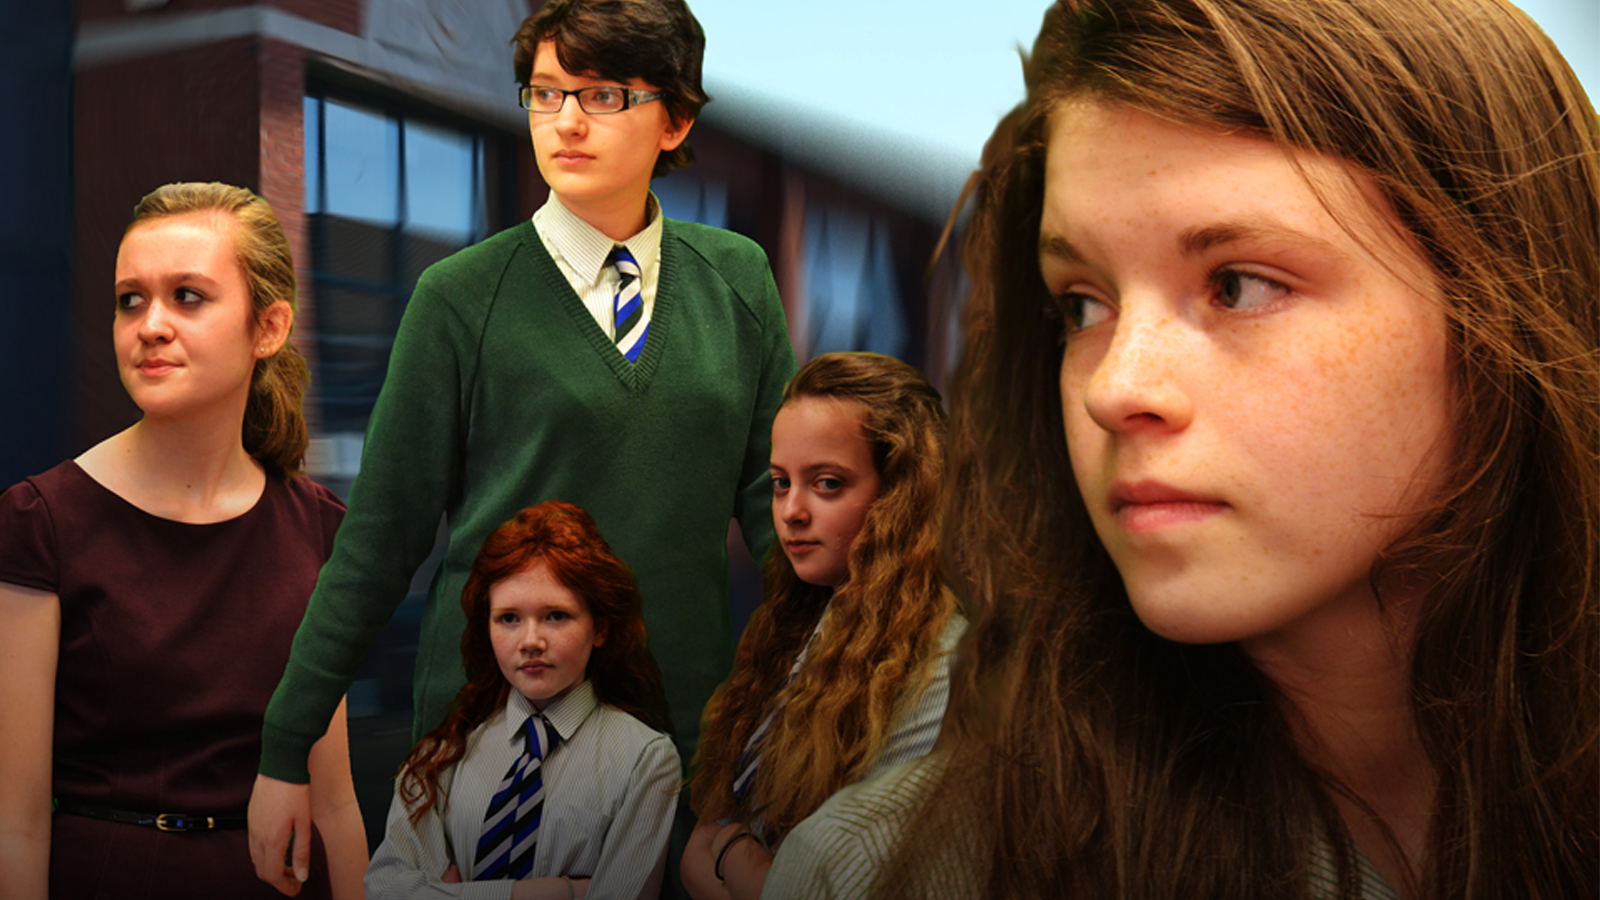 pupils posing for movie poster